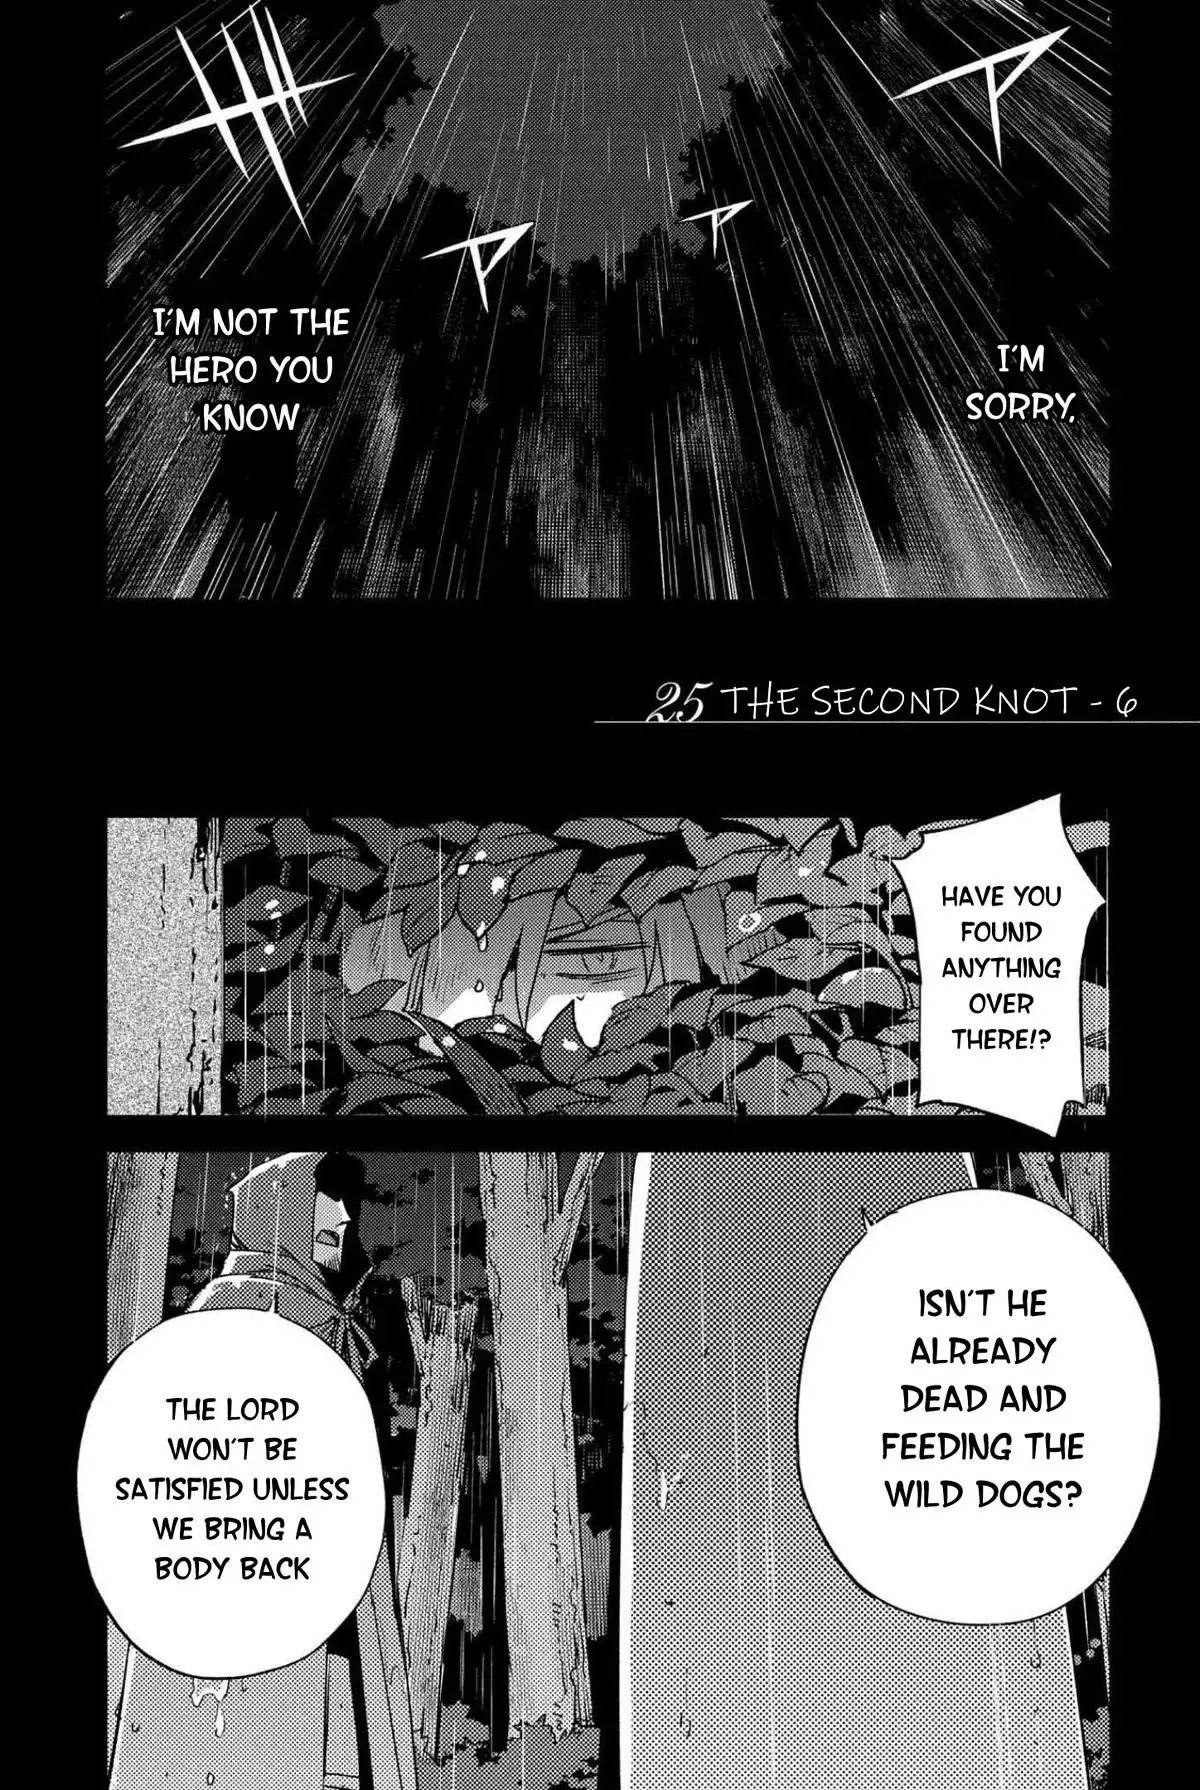 Fate/grand Order: Epic Of Remnant - Subspecies Singularity Iv: Taboo Advent Salem: Salem Of Heresy - 25 page 2-0045d7de